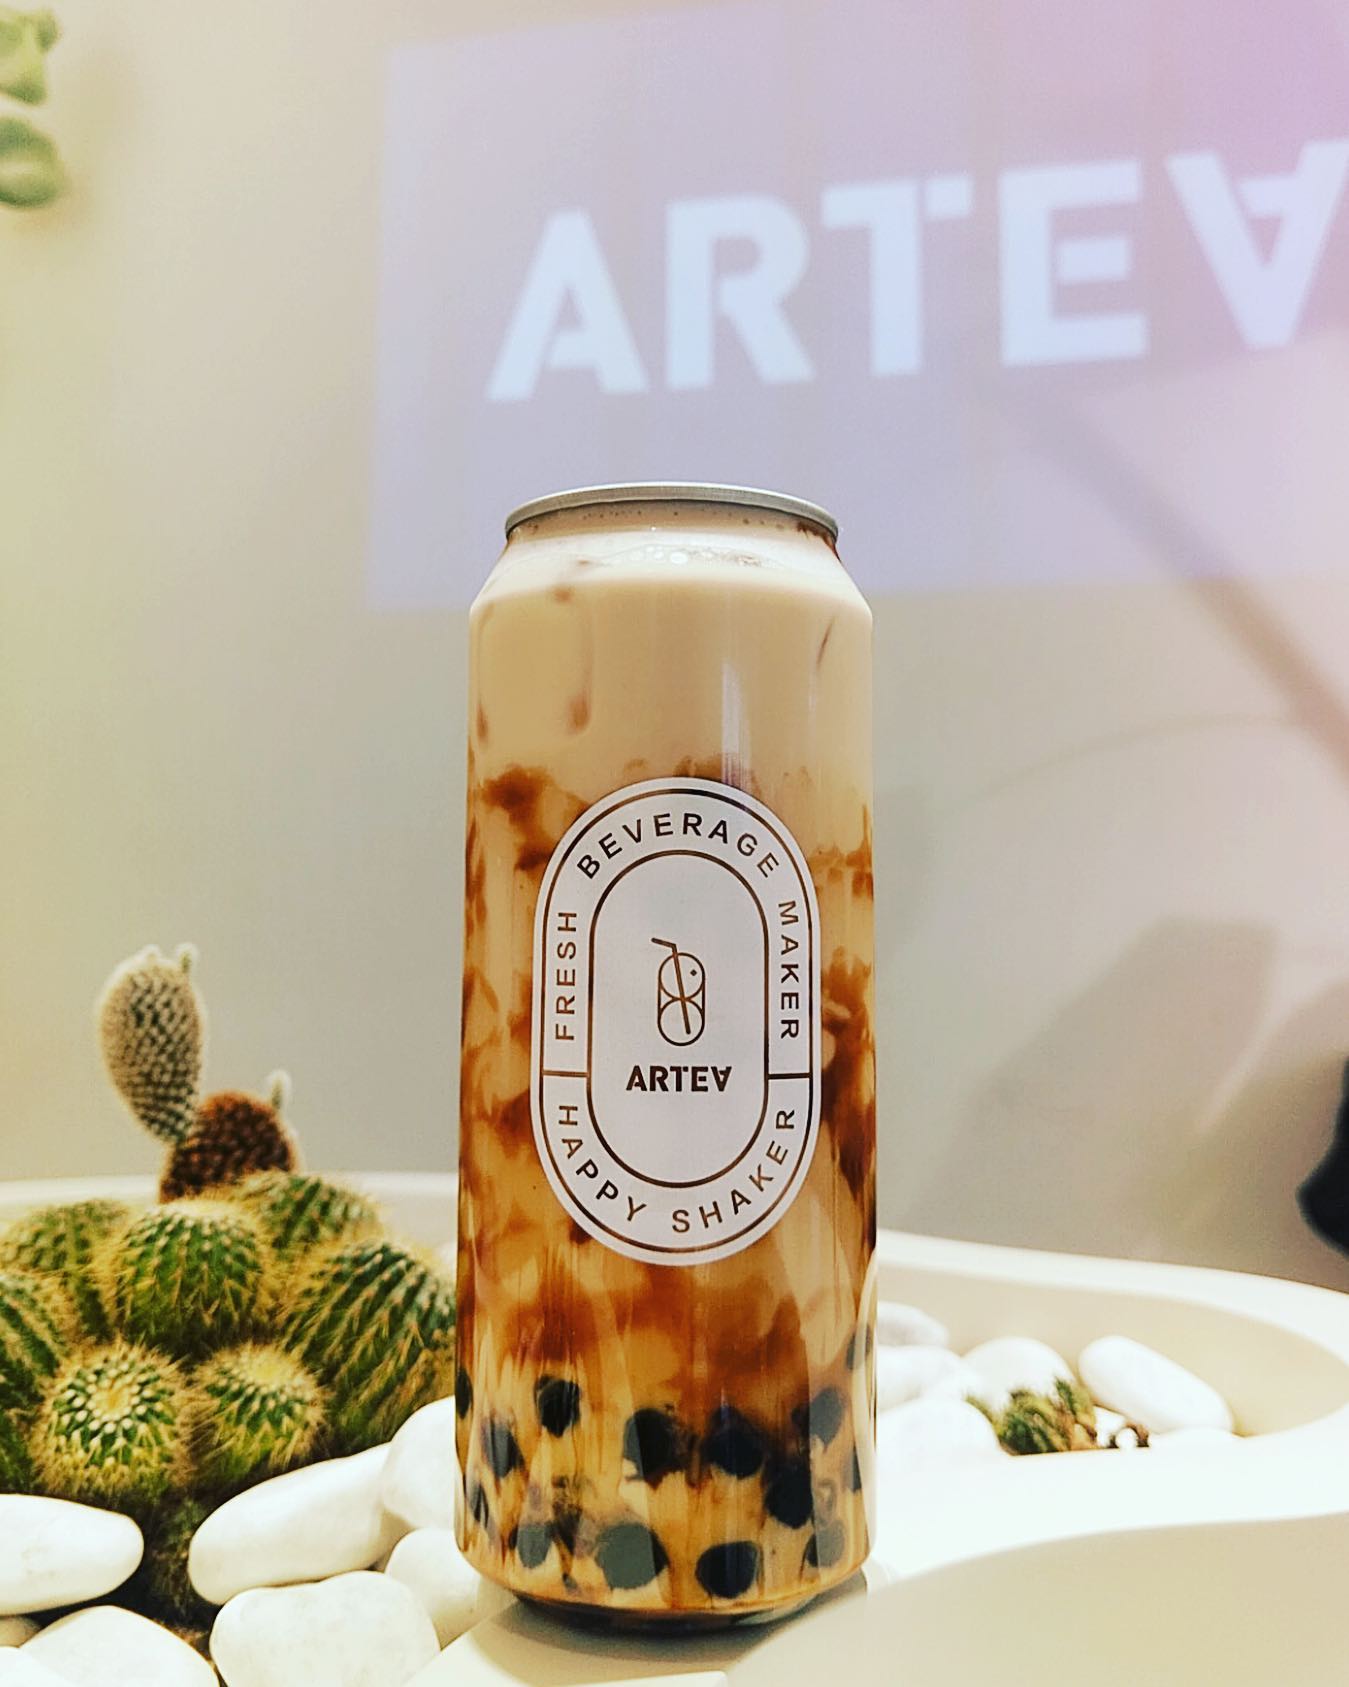 This cafe in Singapore sells Brown Sugar Bubble Milk in a can for $5.20 - 2